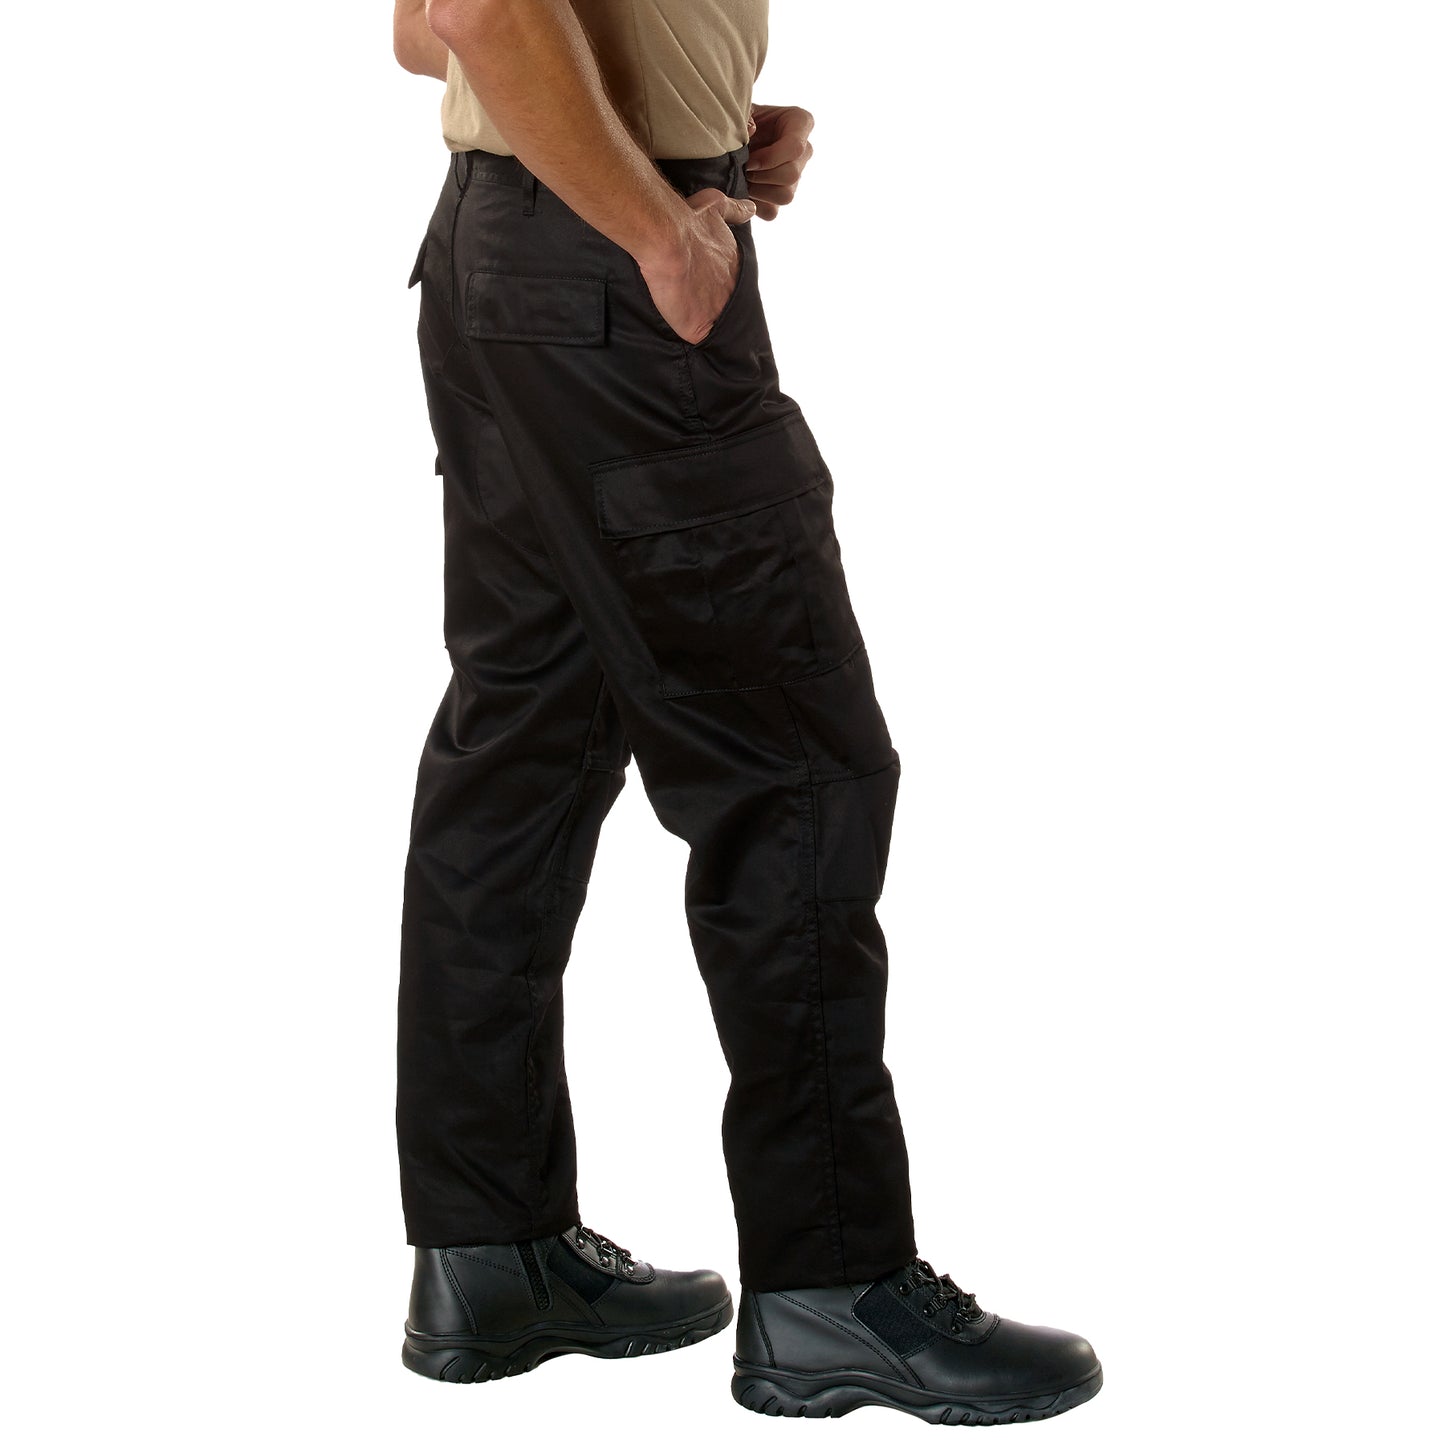 Relaxed Fit BDU Cargo Pants Black & Camouflage Zip Fly Mens Camo Battle Pants